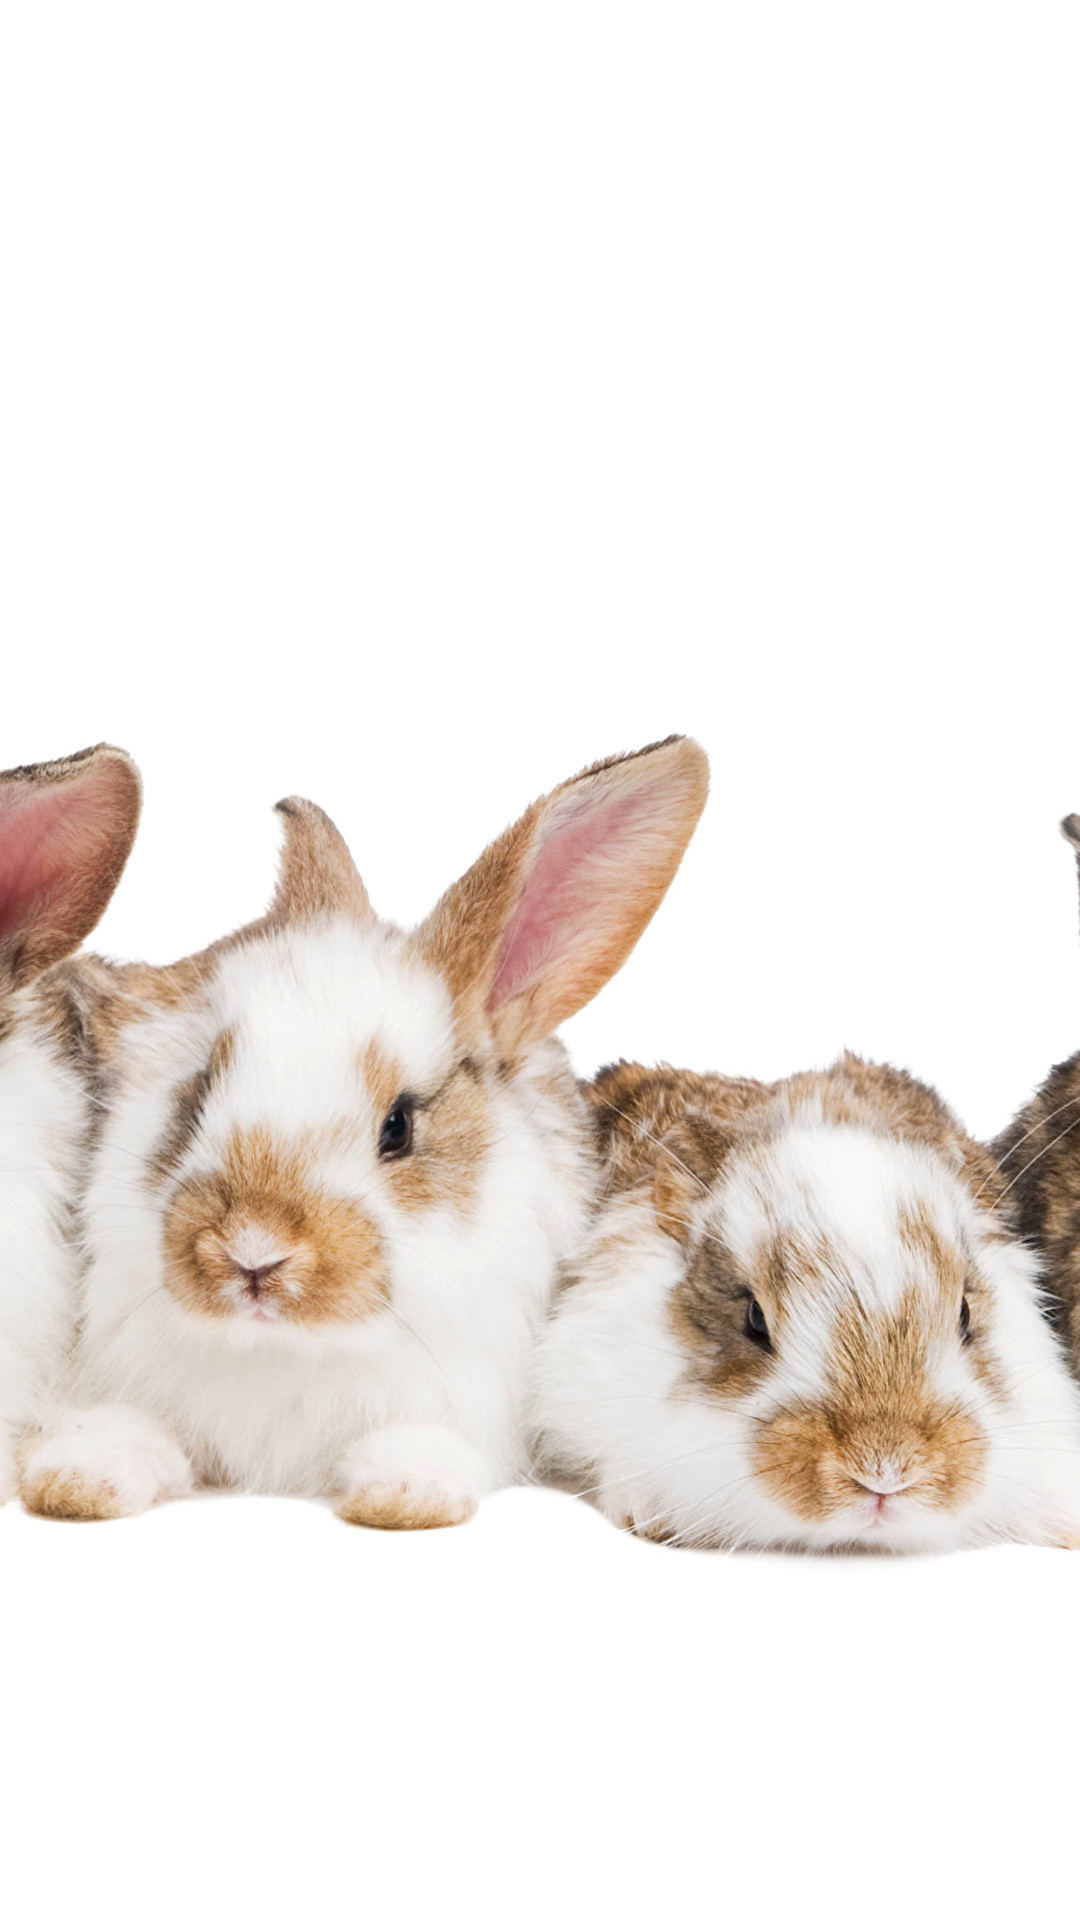 1080x1920 Wallpapers Rabbits Animals White background 